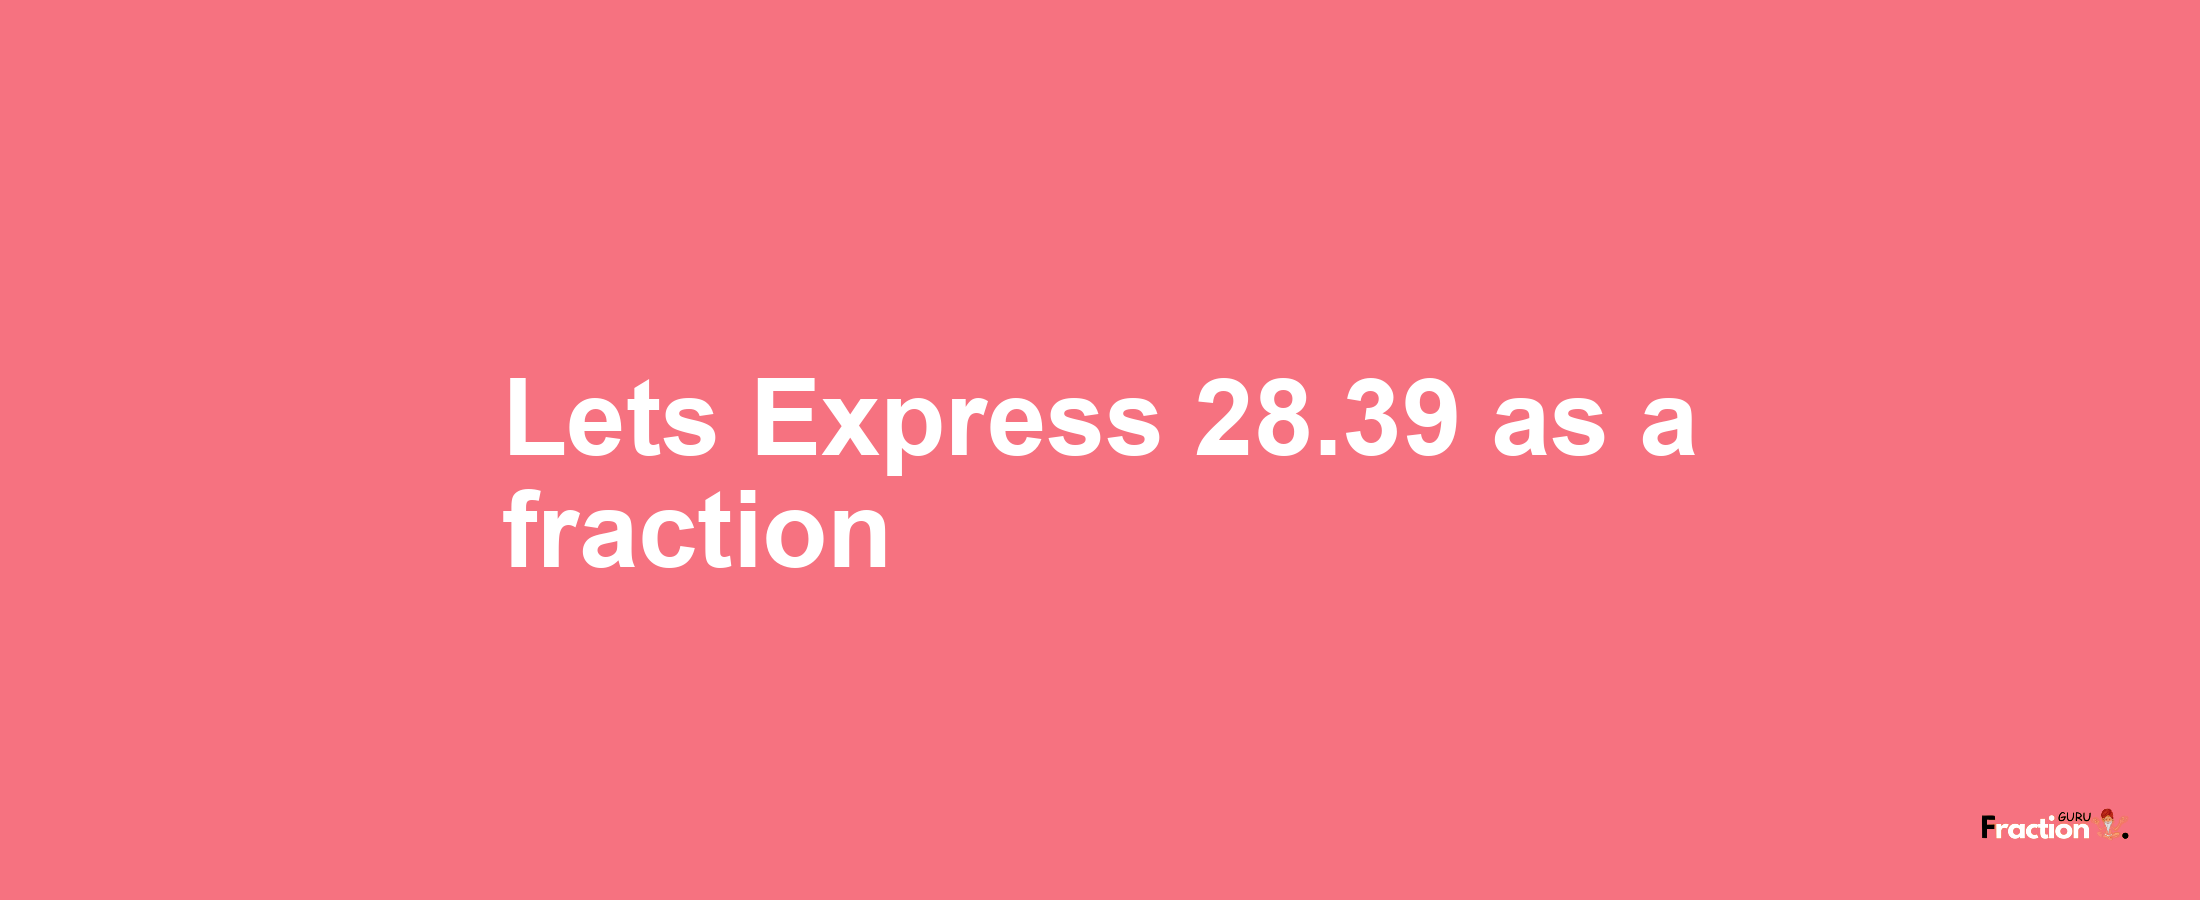 Lets Express 28.39 as afraction